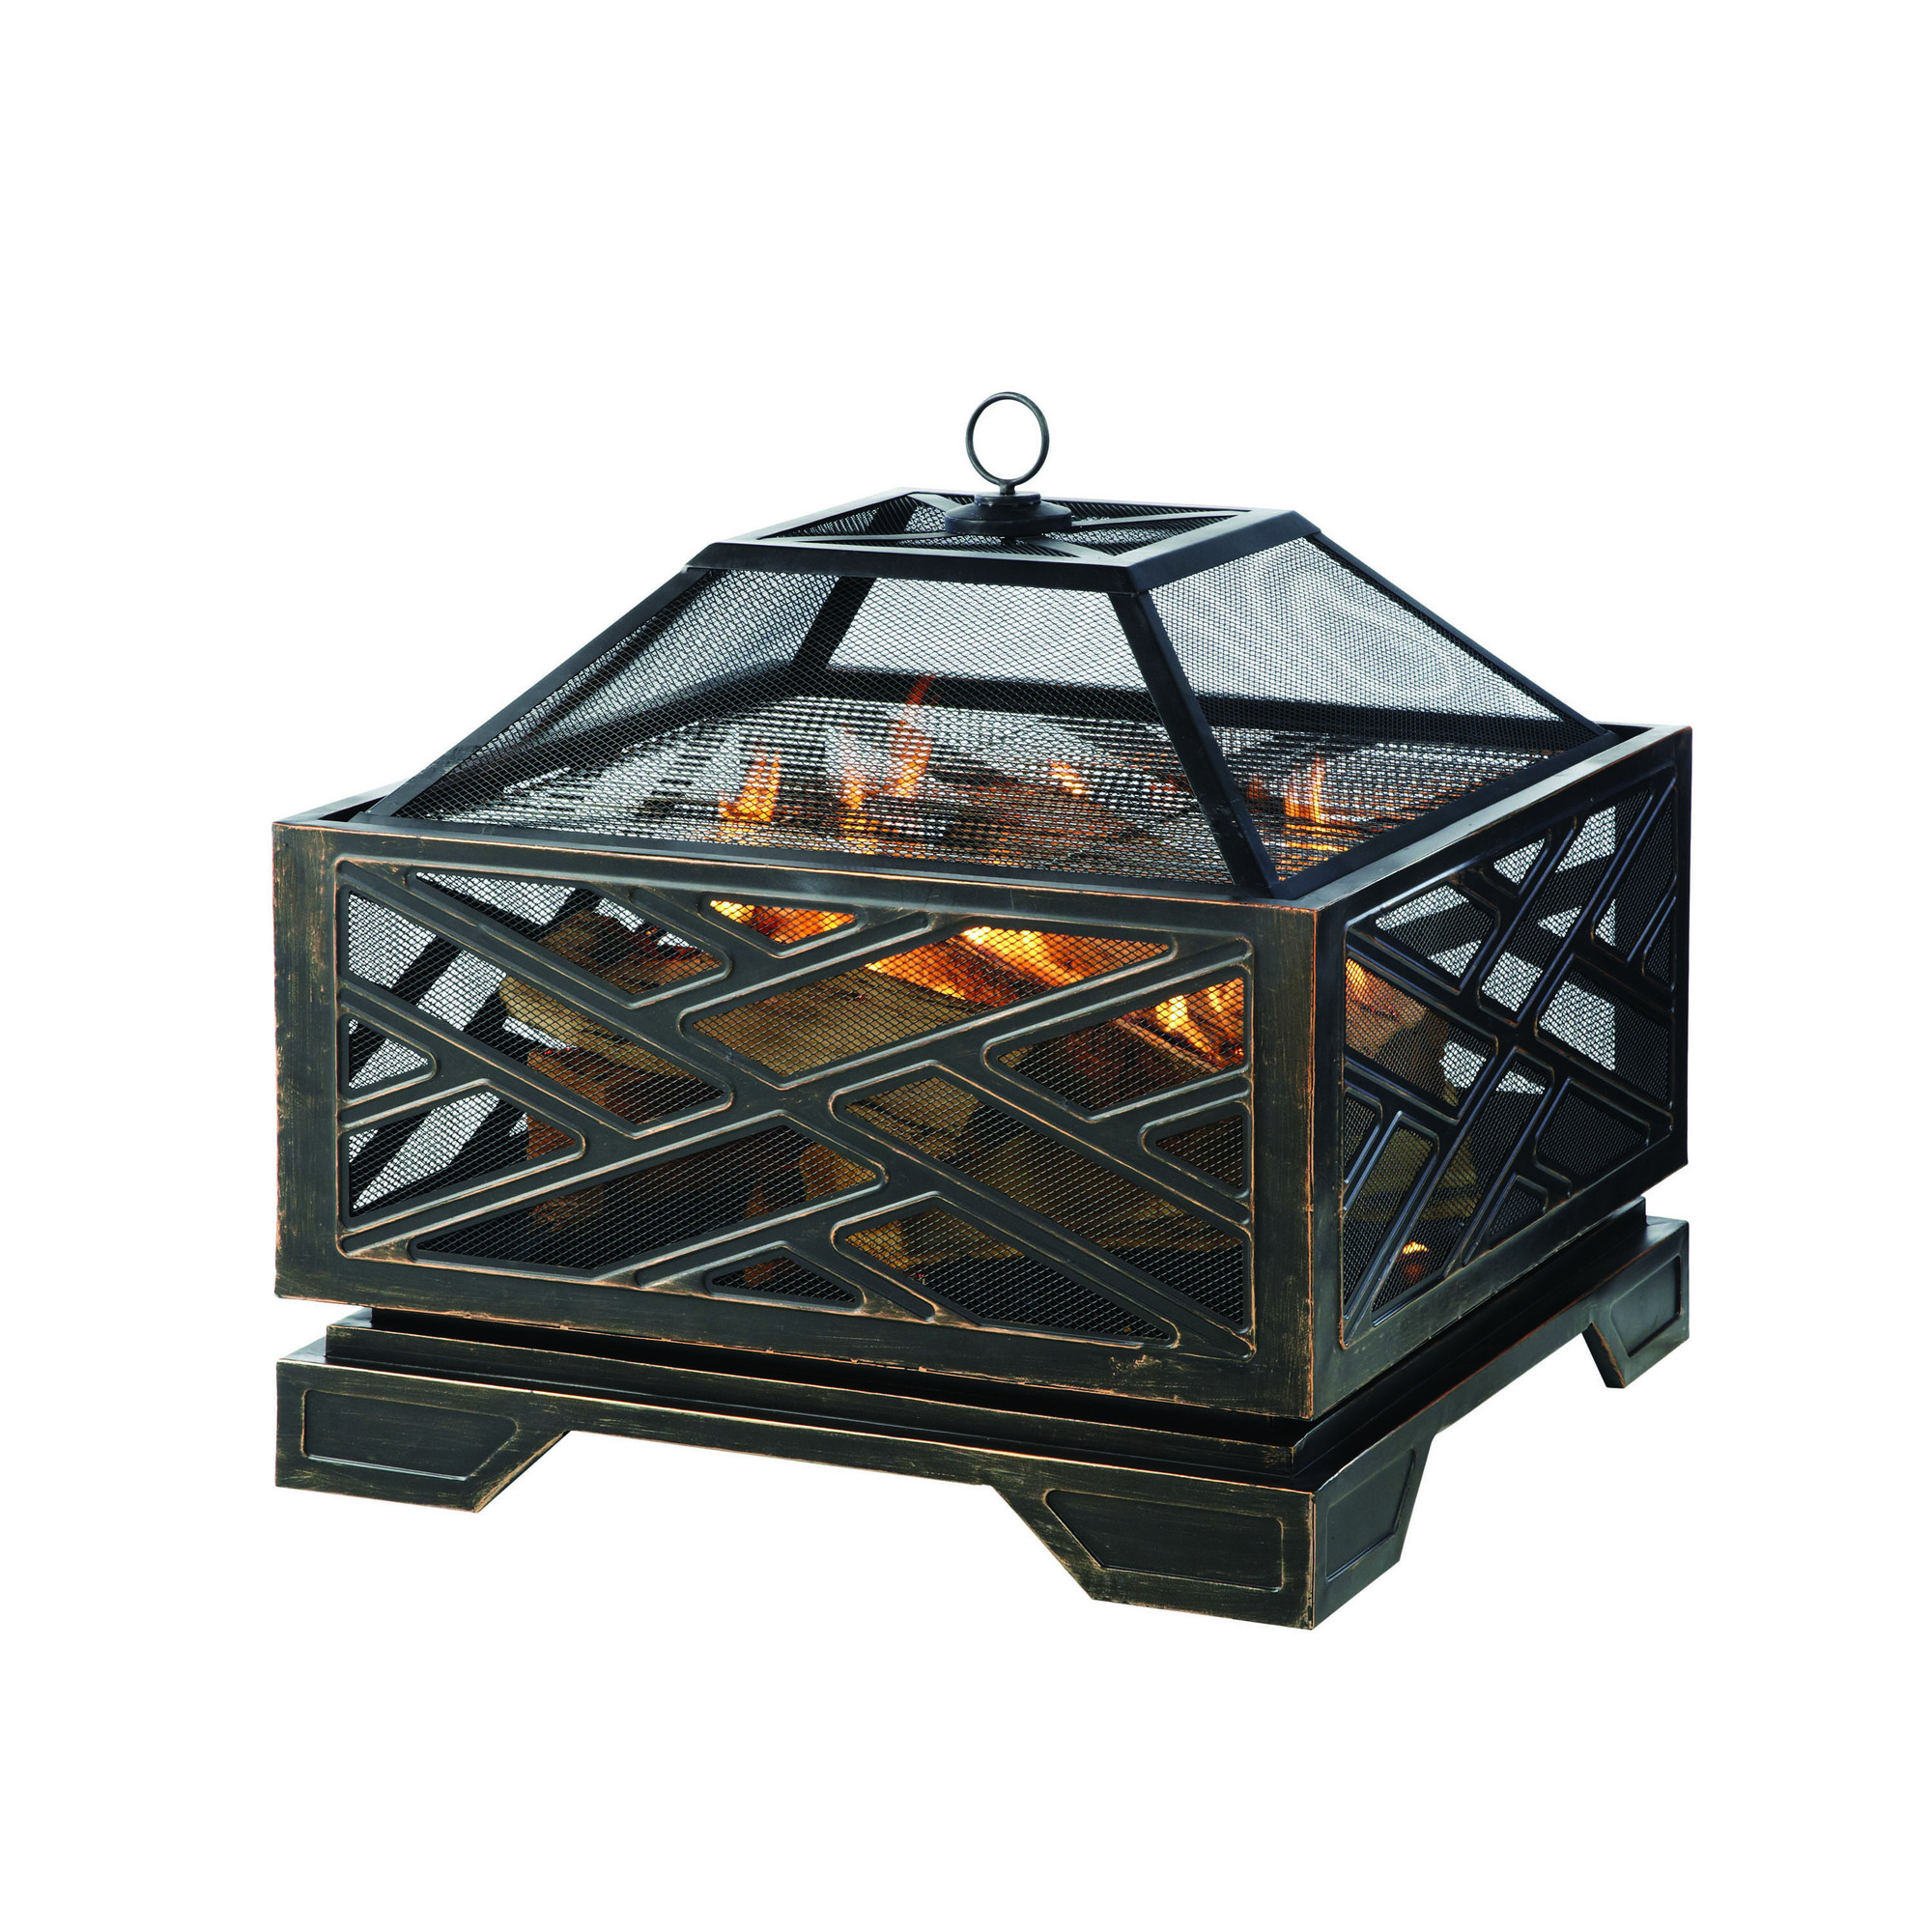 Pleasant Hearth, Martin 26Inch Square Deep Bowl Fire Pit, Fuel Type Wood, Material Carbon Steel, Model OFW165S